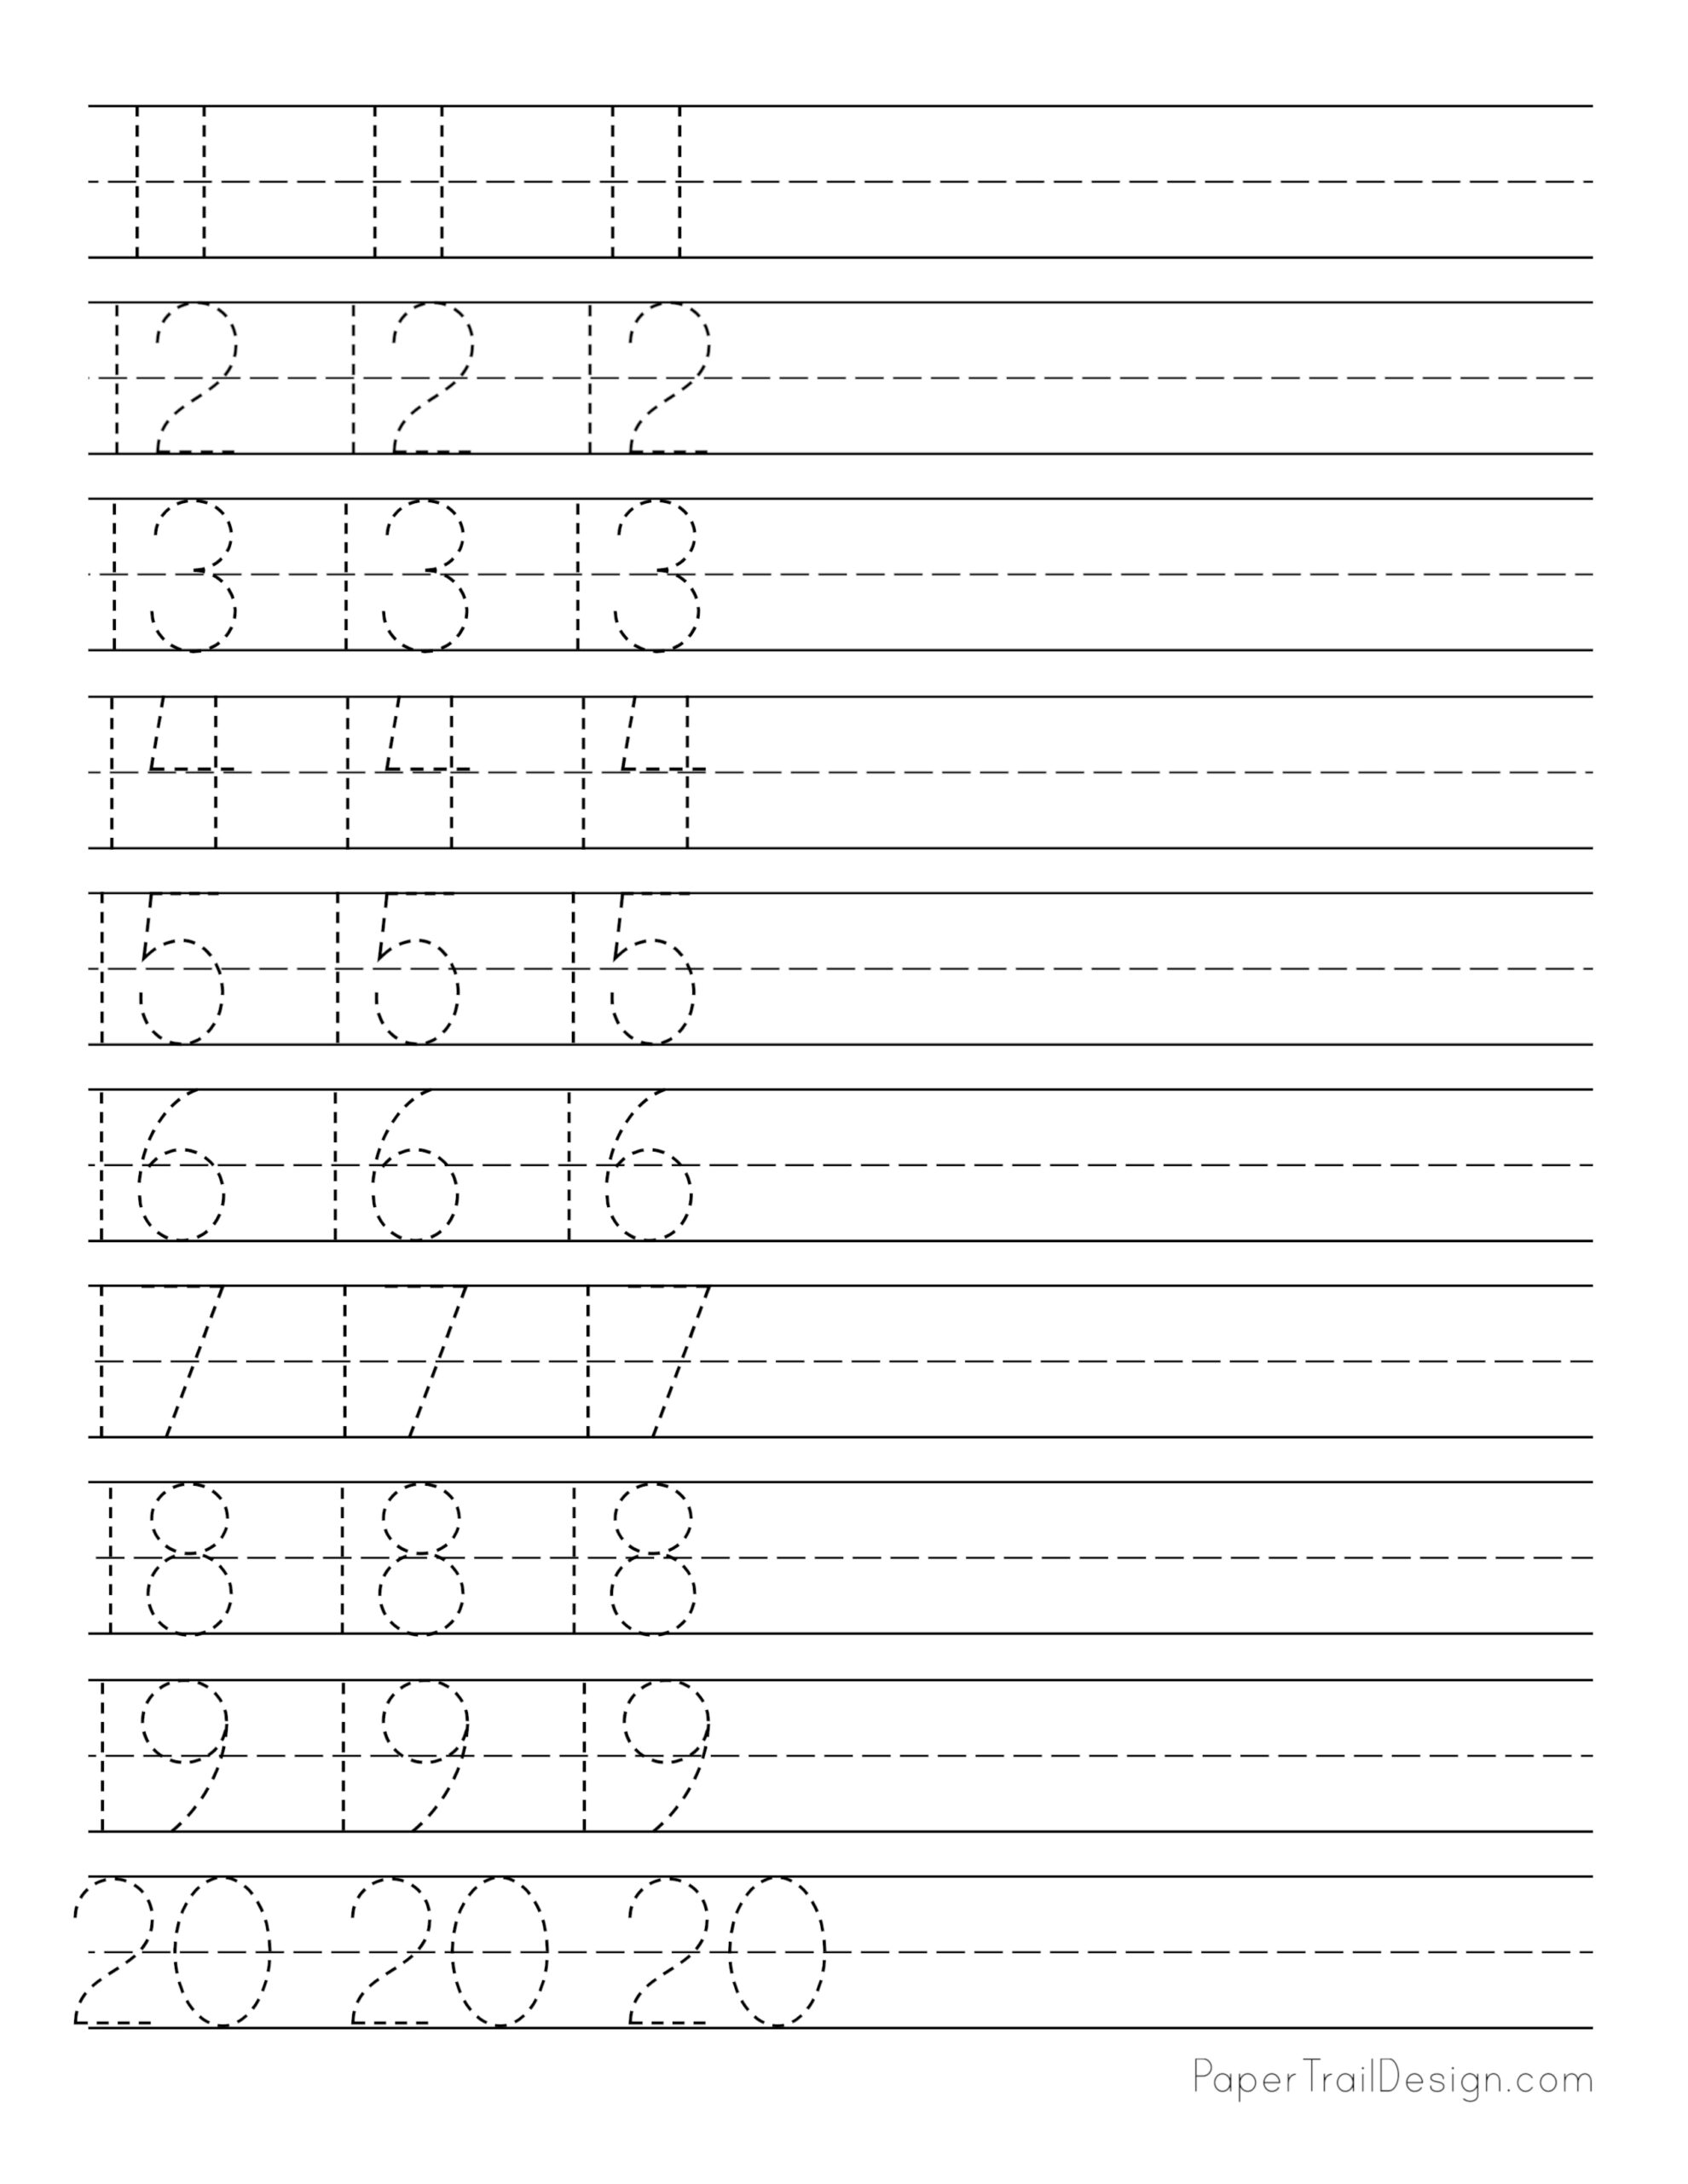 free number tracing worksheets paper trail design